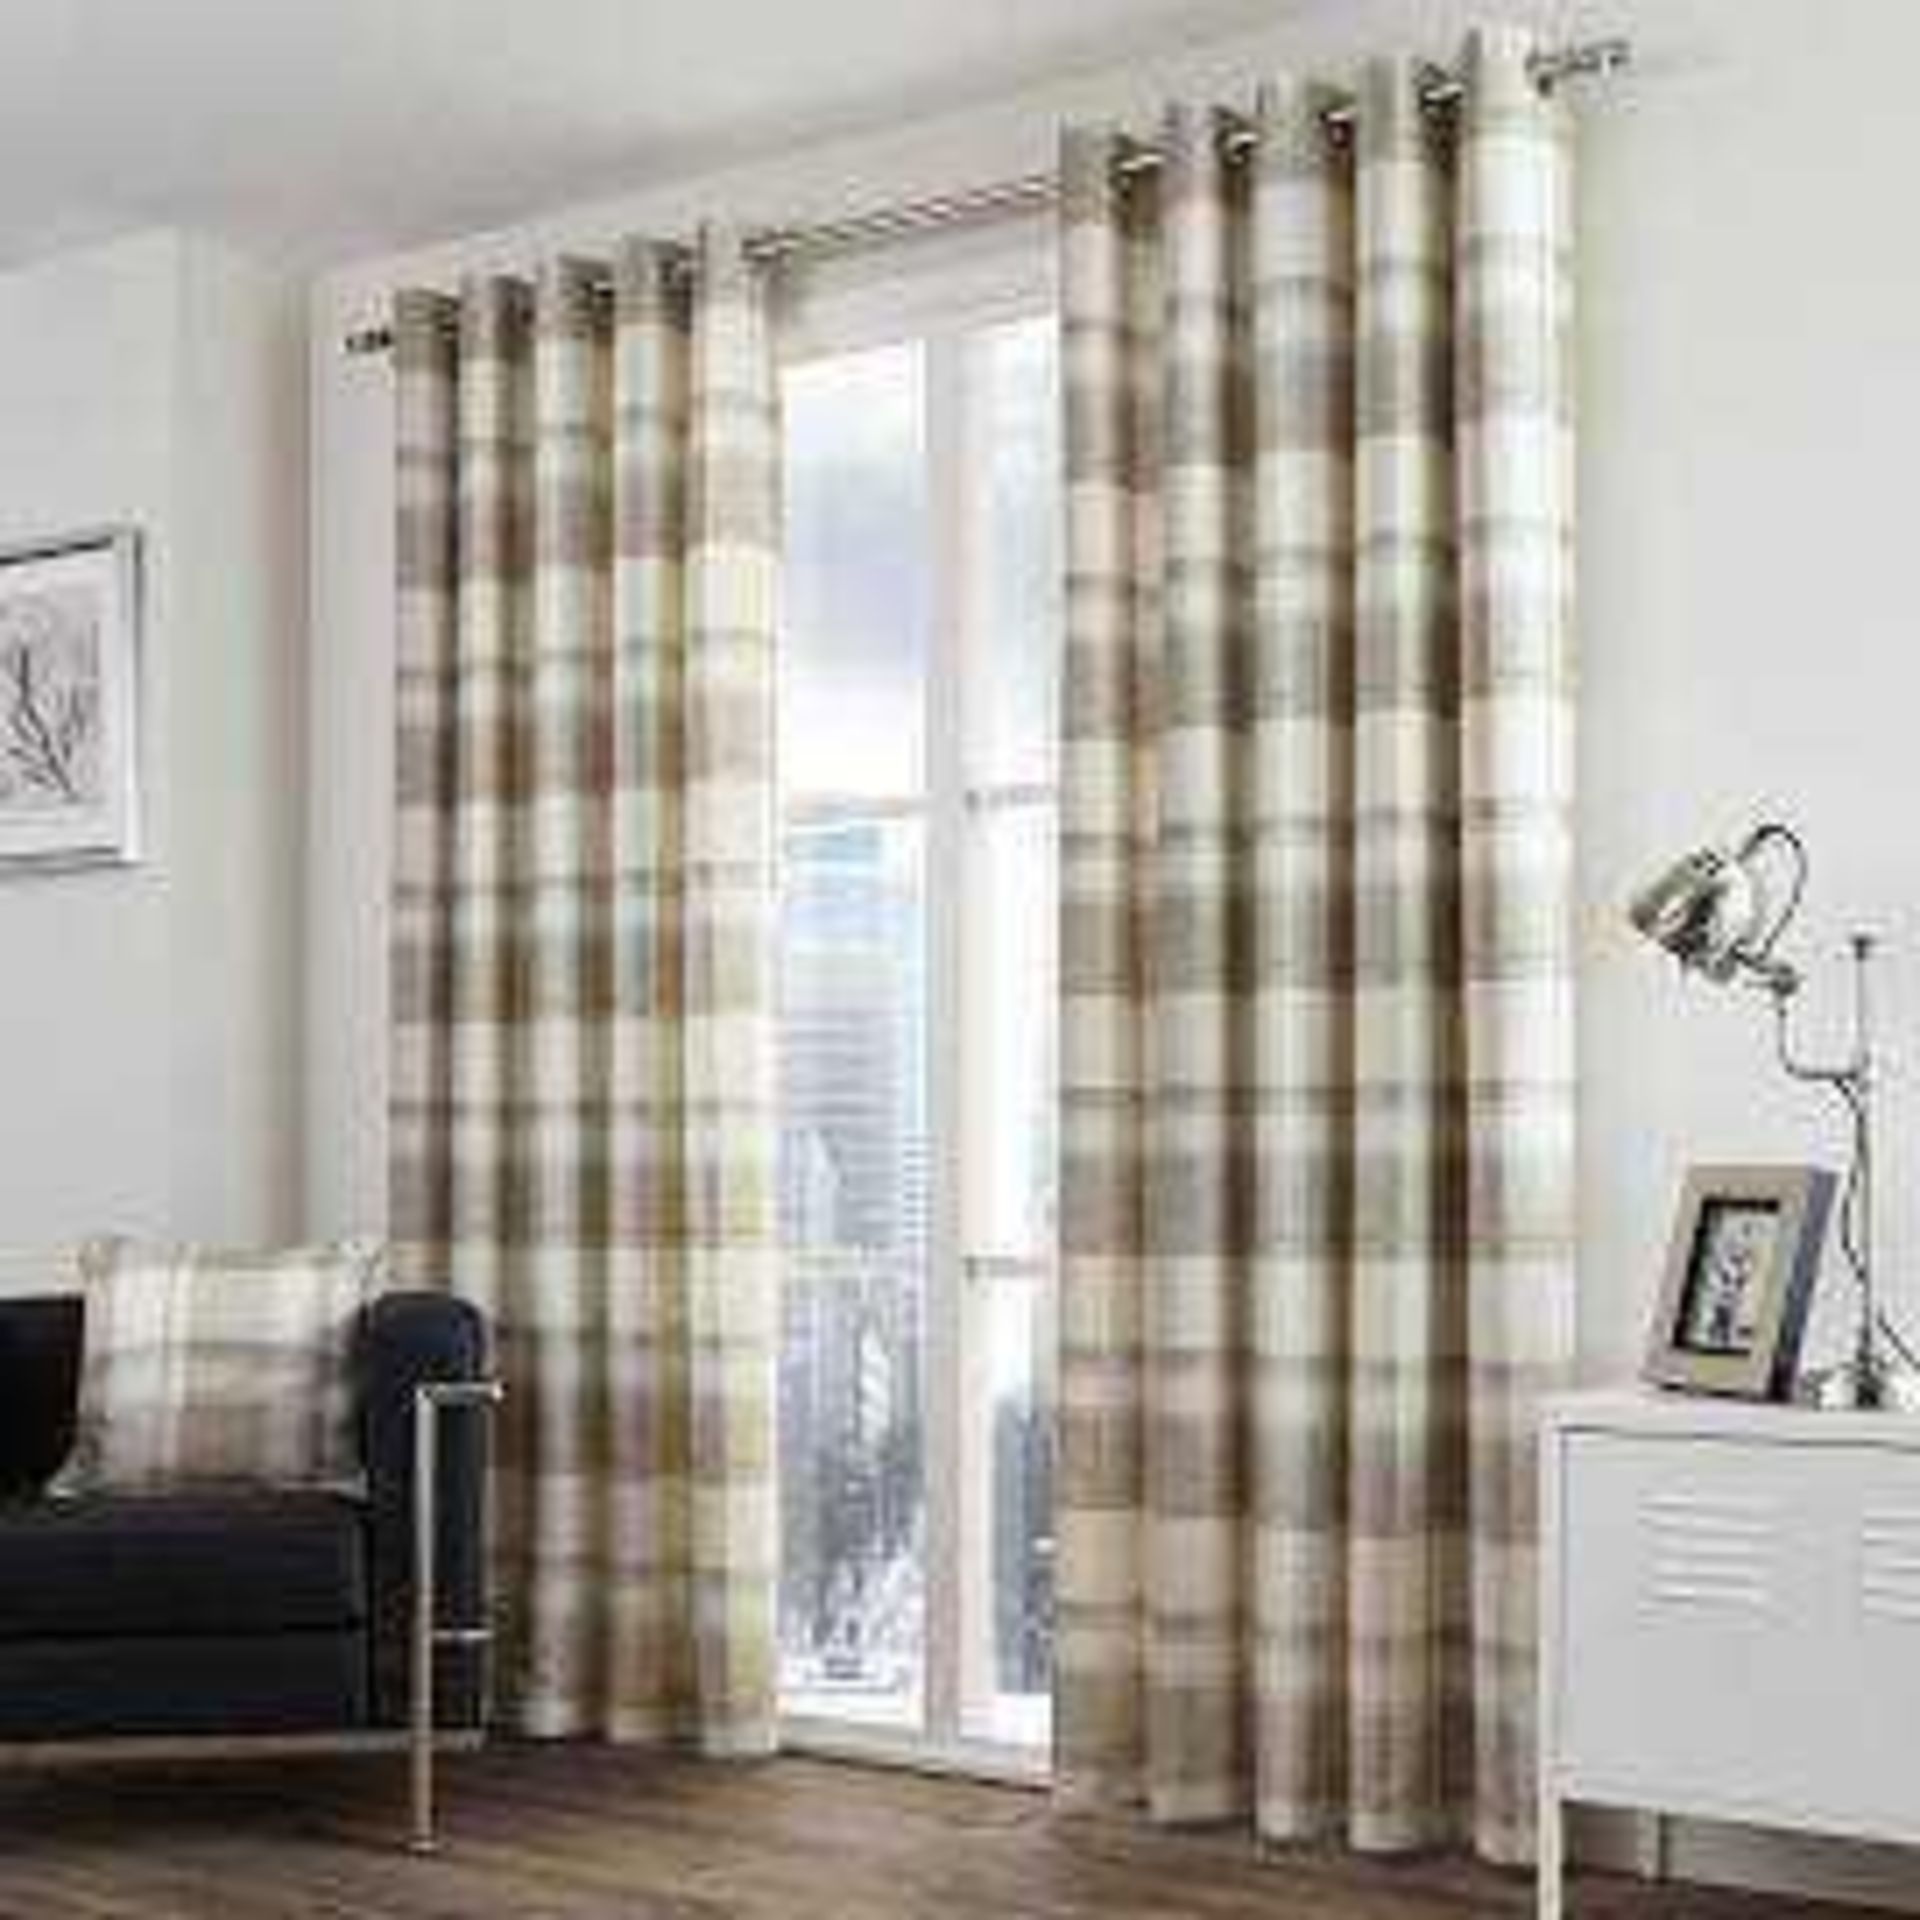 Combined Rrp £175 Lot To Contain 3 Assorted Curtains - Image 2 of 8